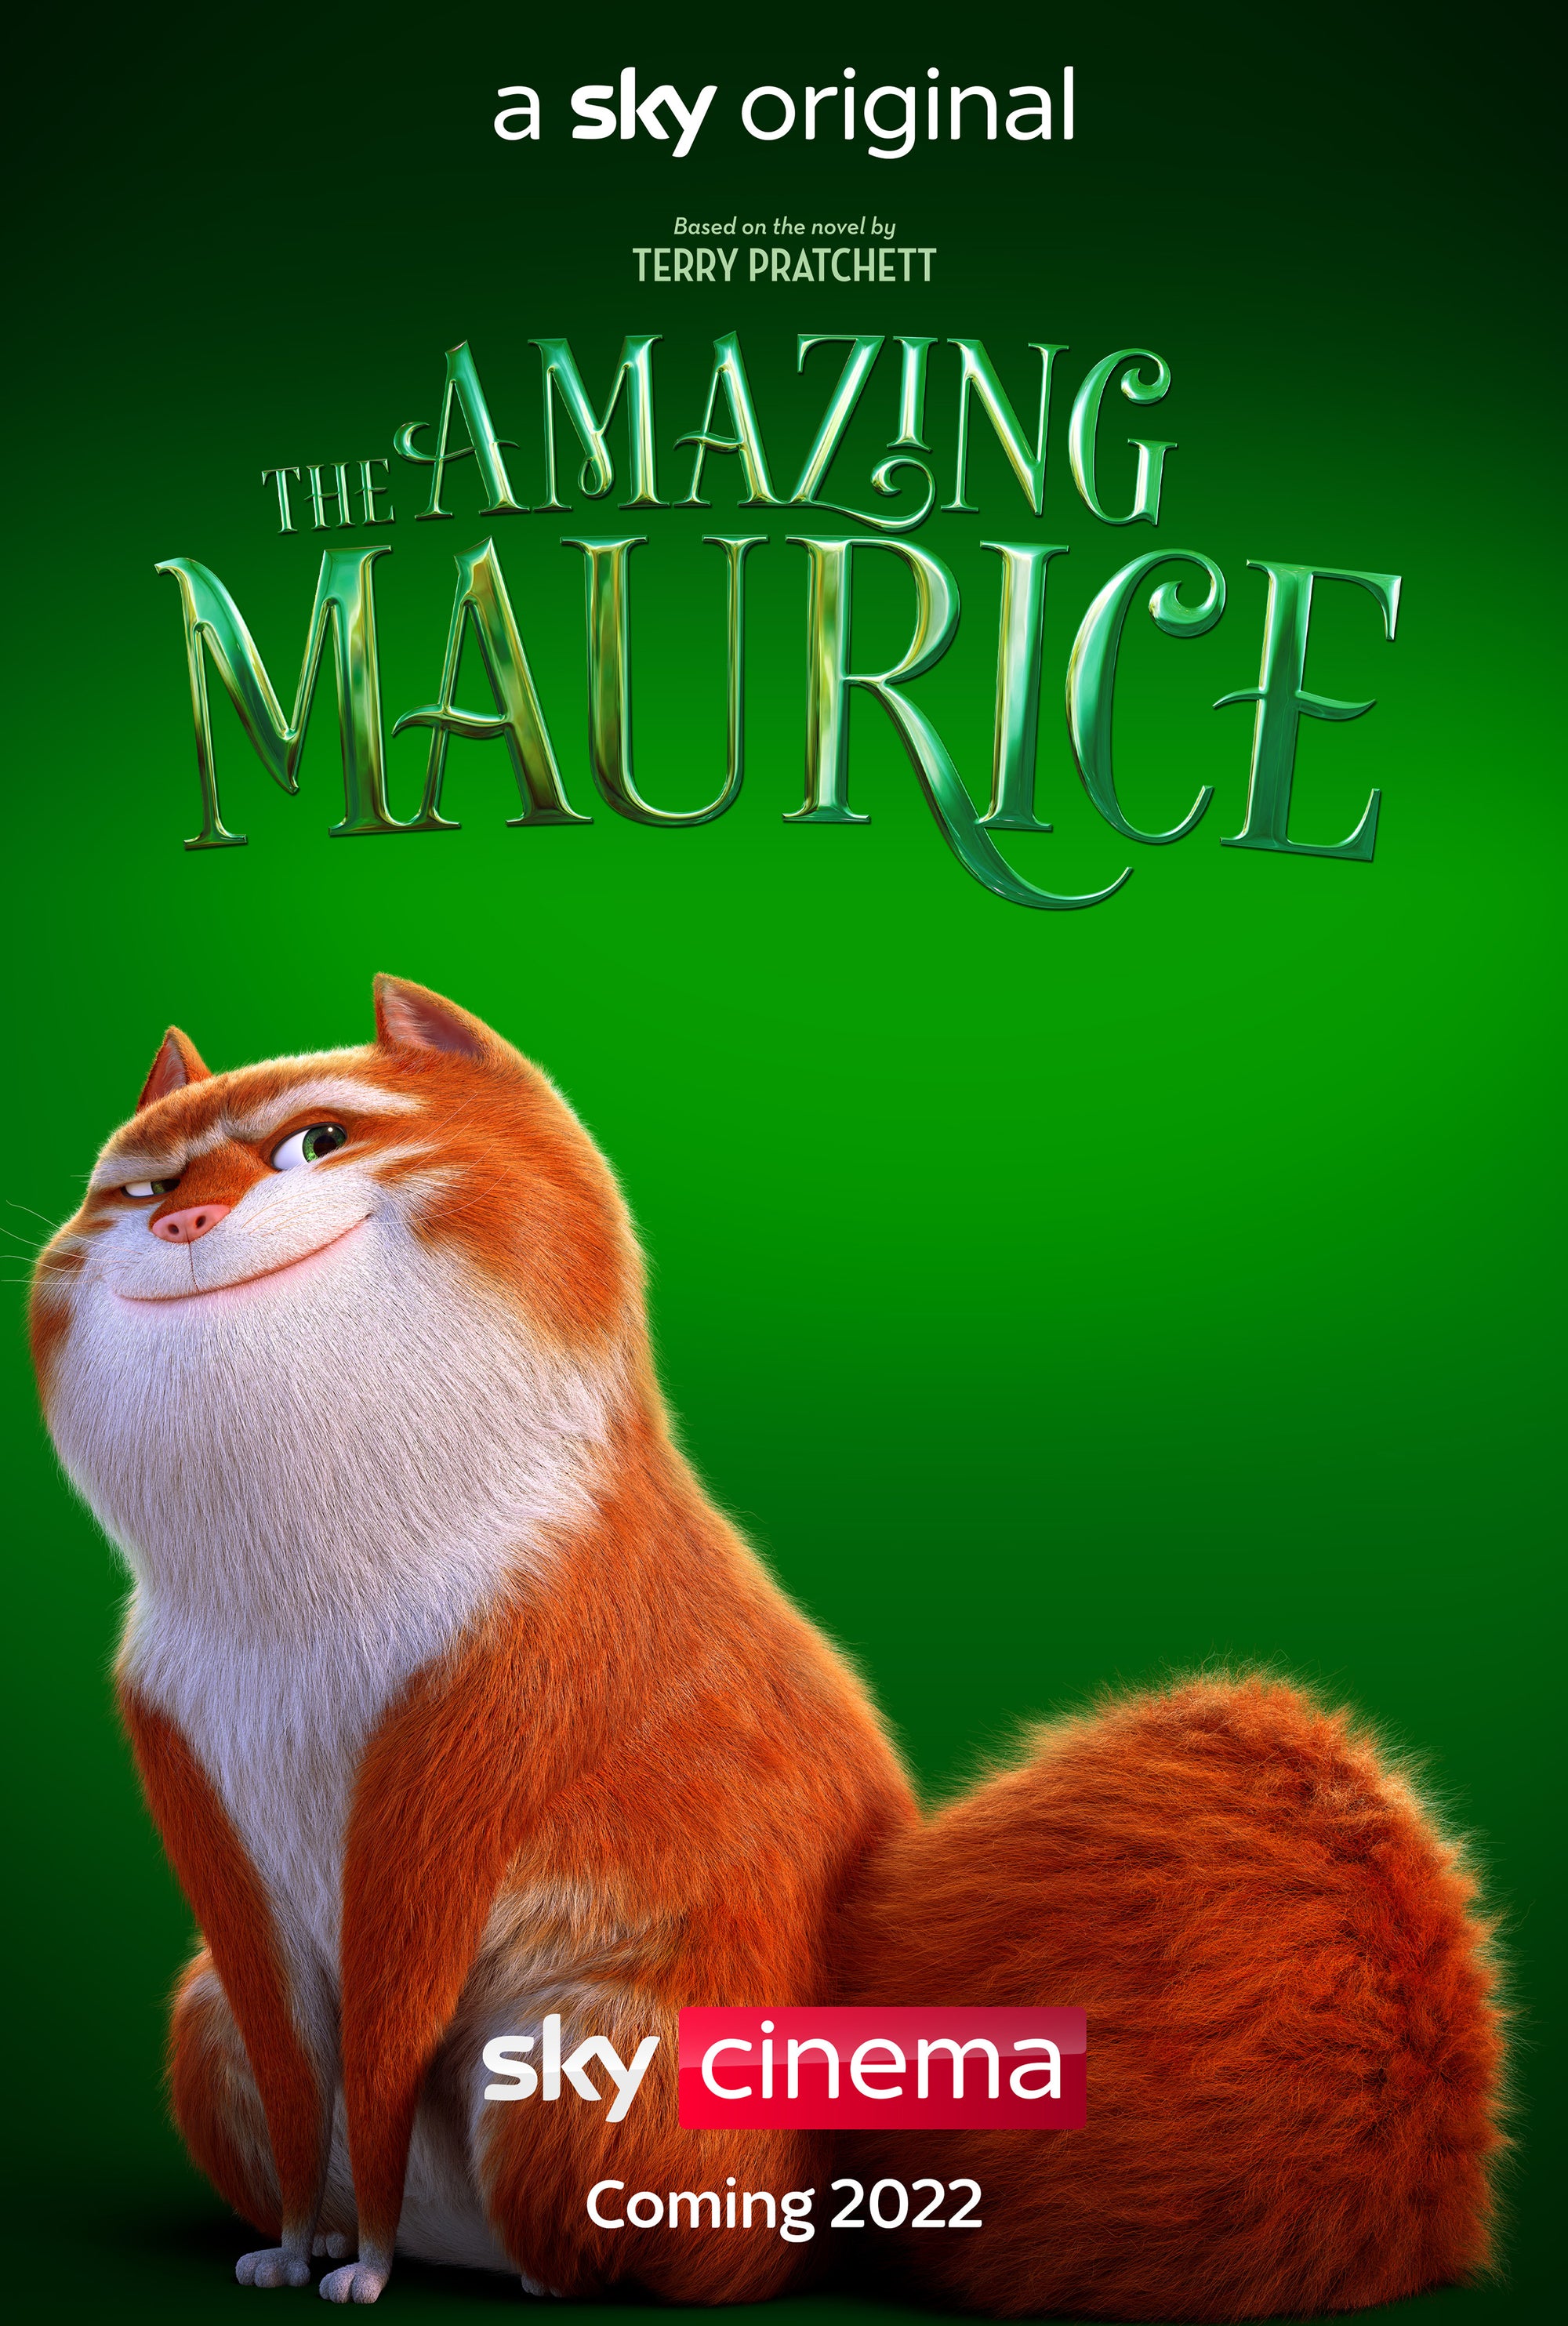 First Look teaser poster revealed for The Amazing Maurice